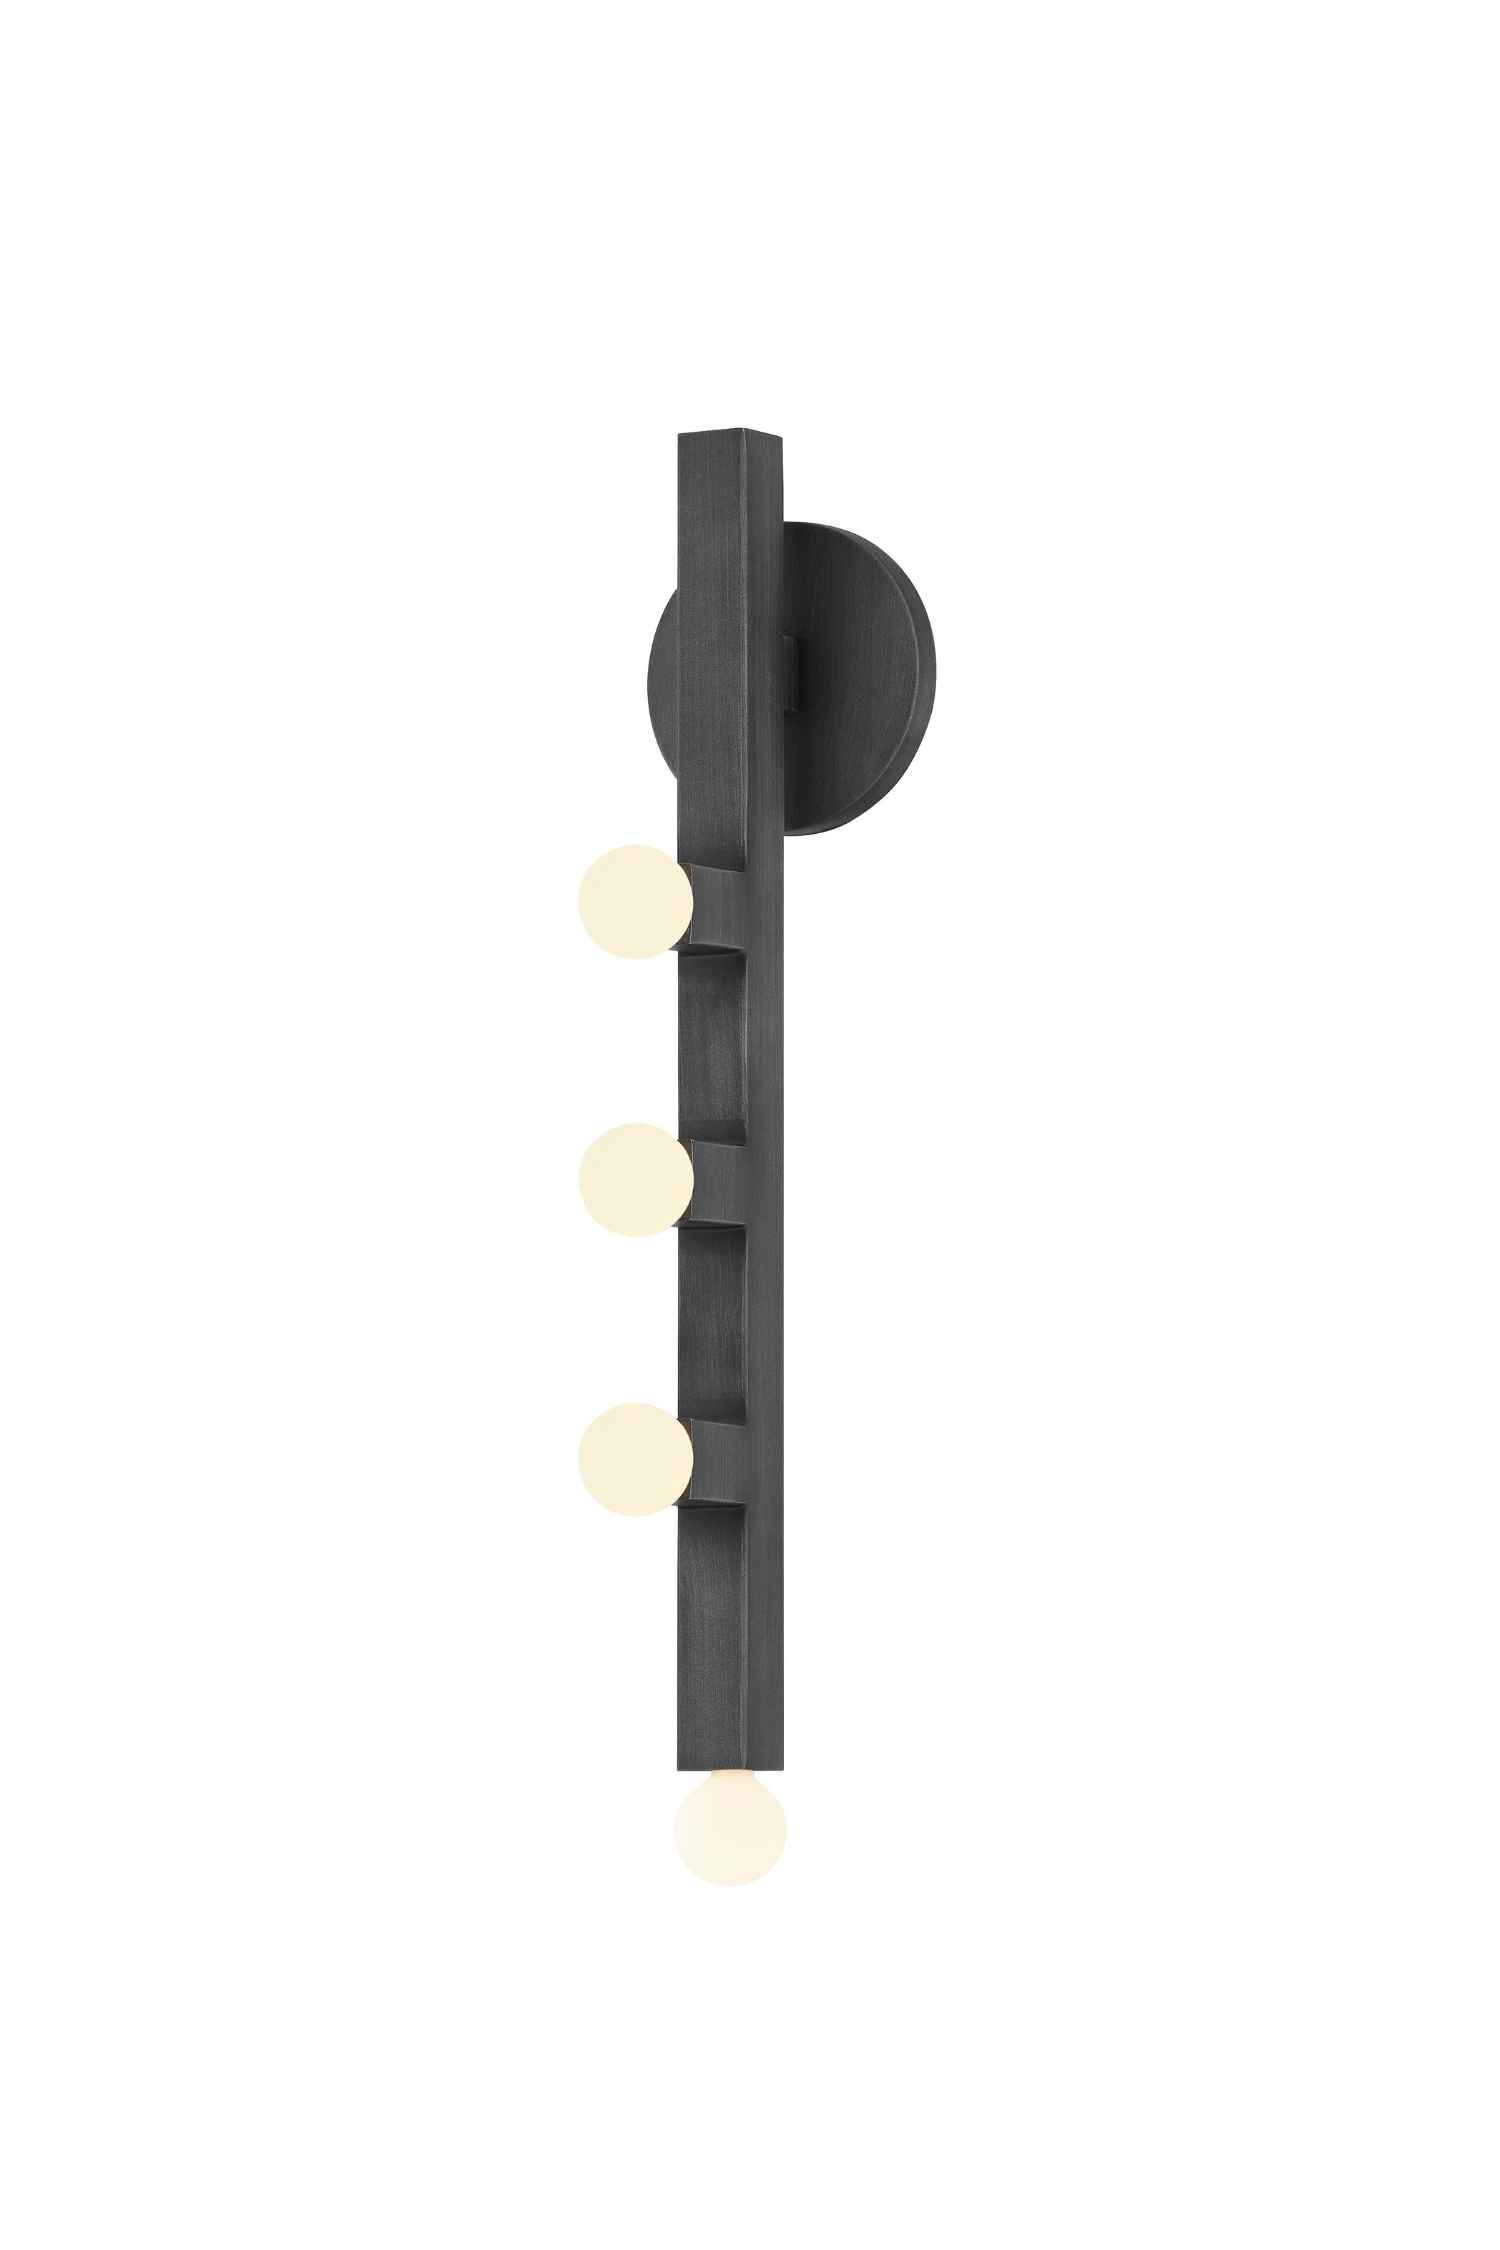 Sutter Wall Sconce - 2 Finishes